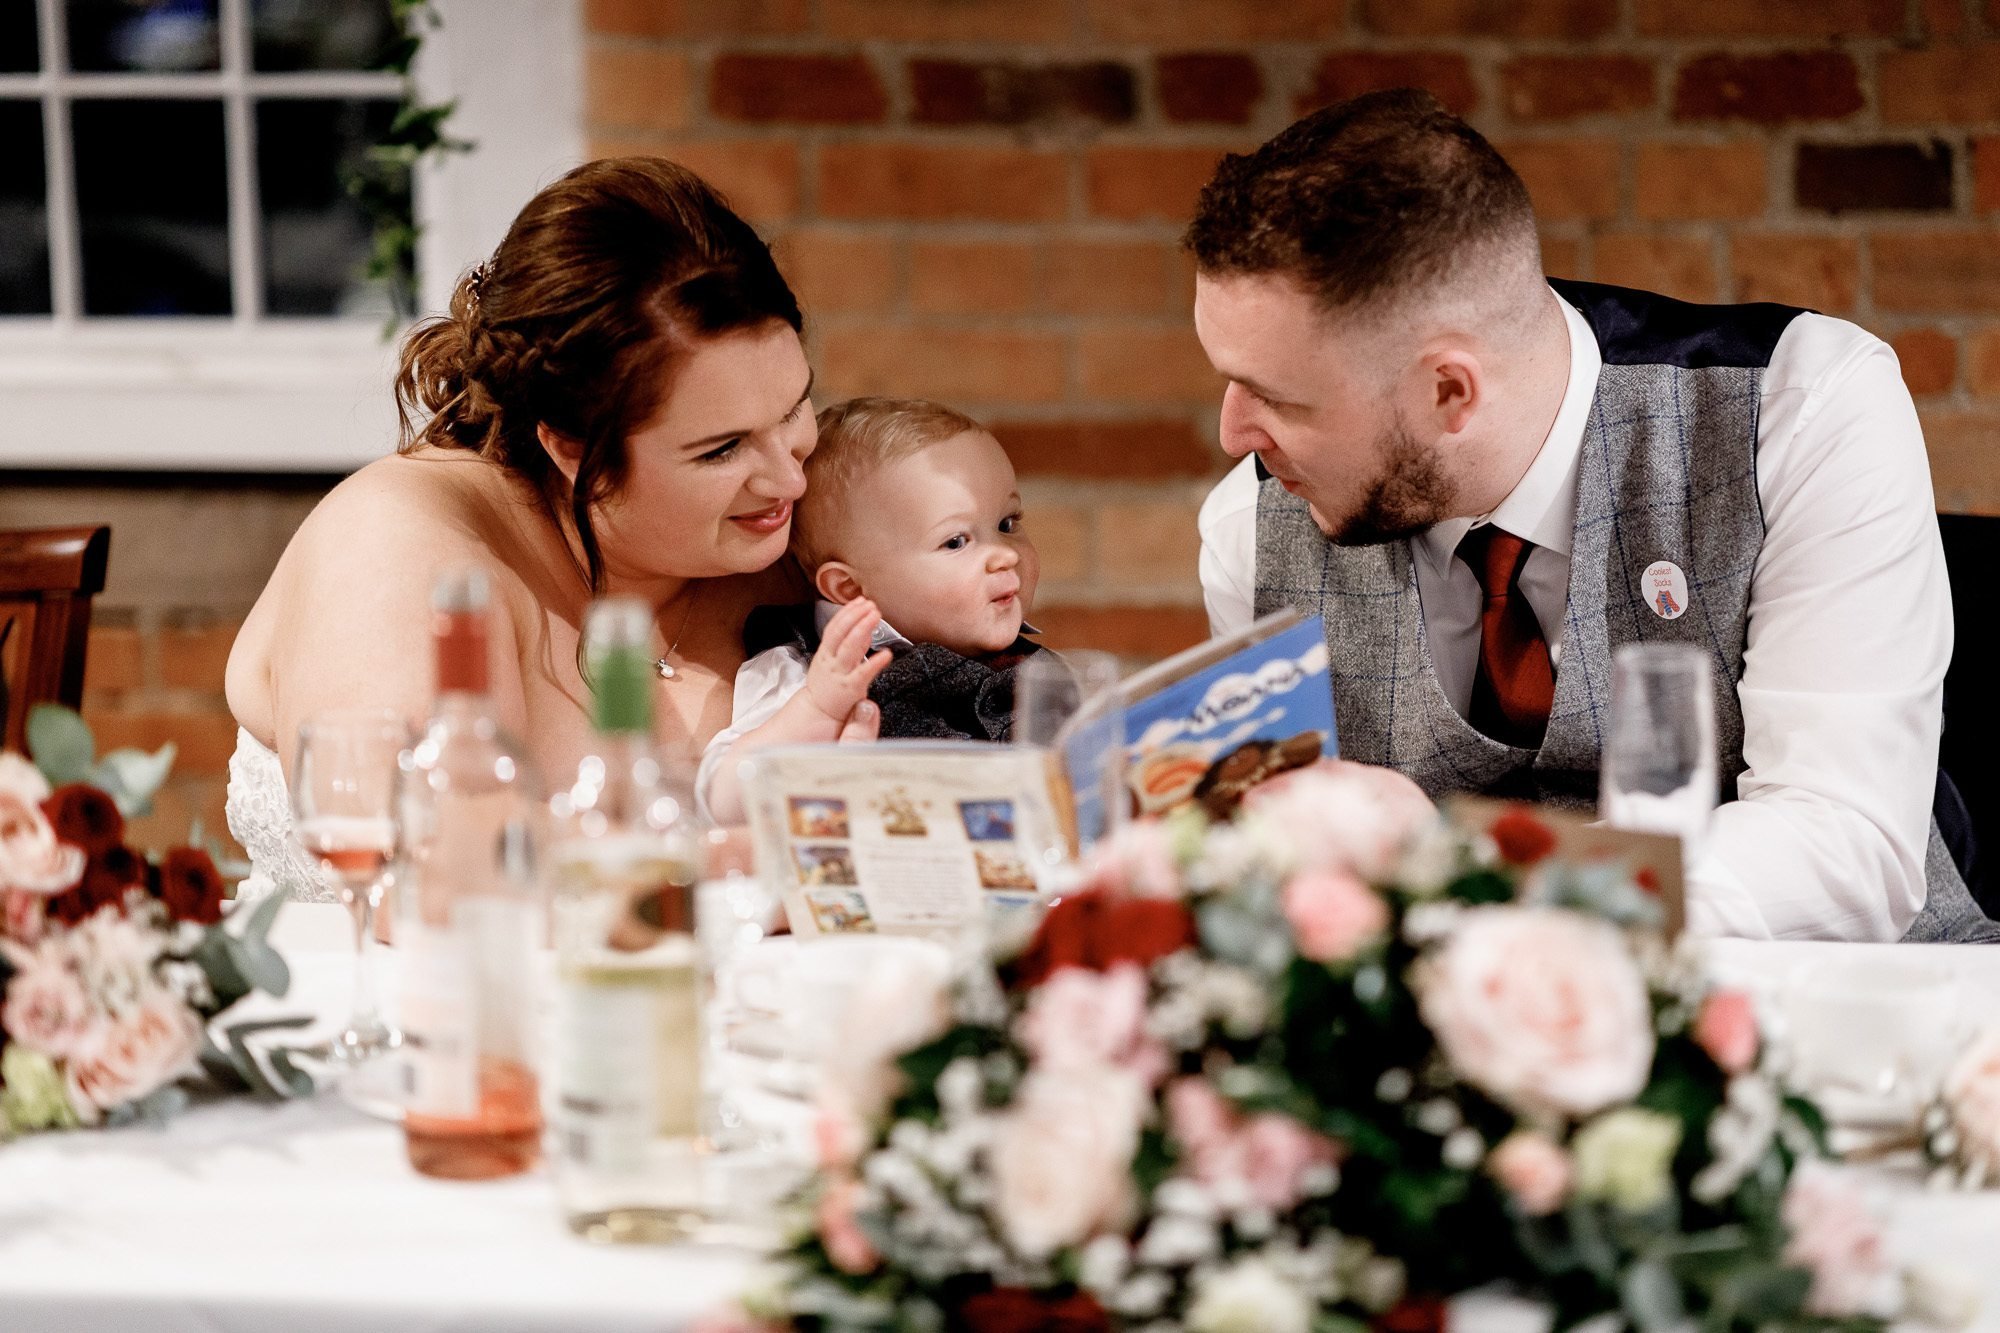 Bride and groom reading to baby son during wedding breakfast